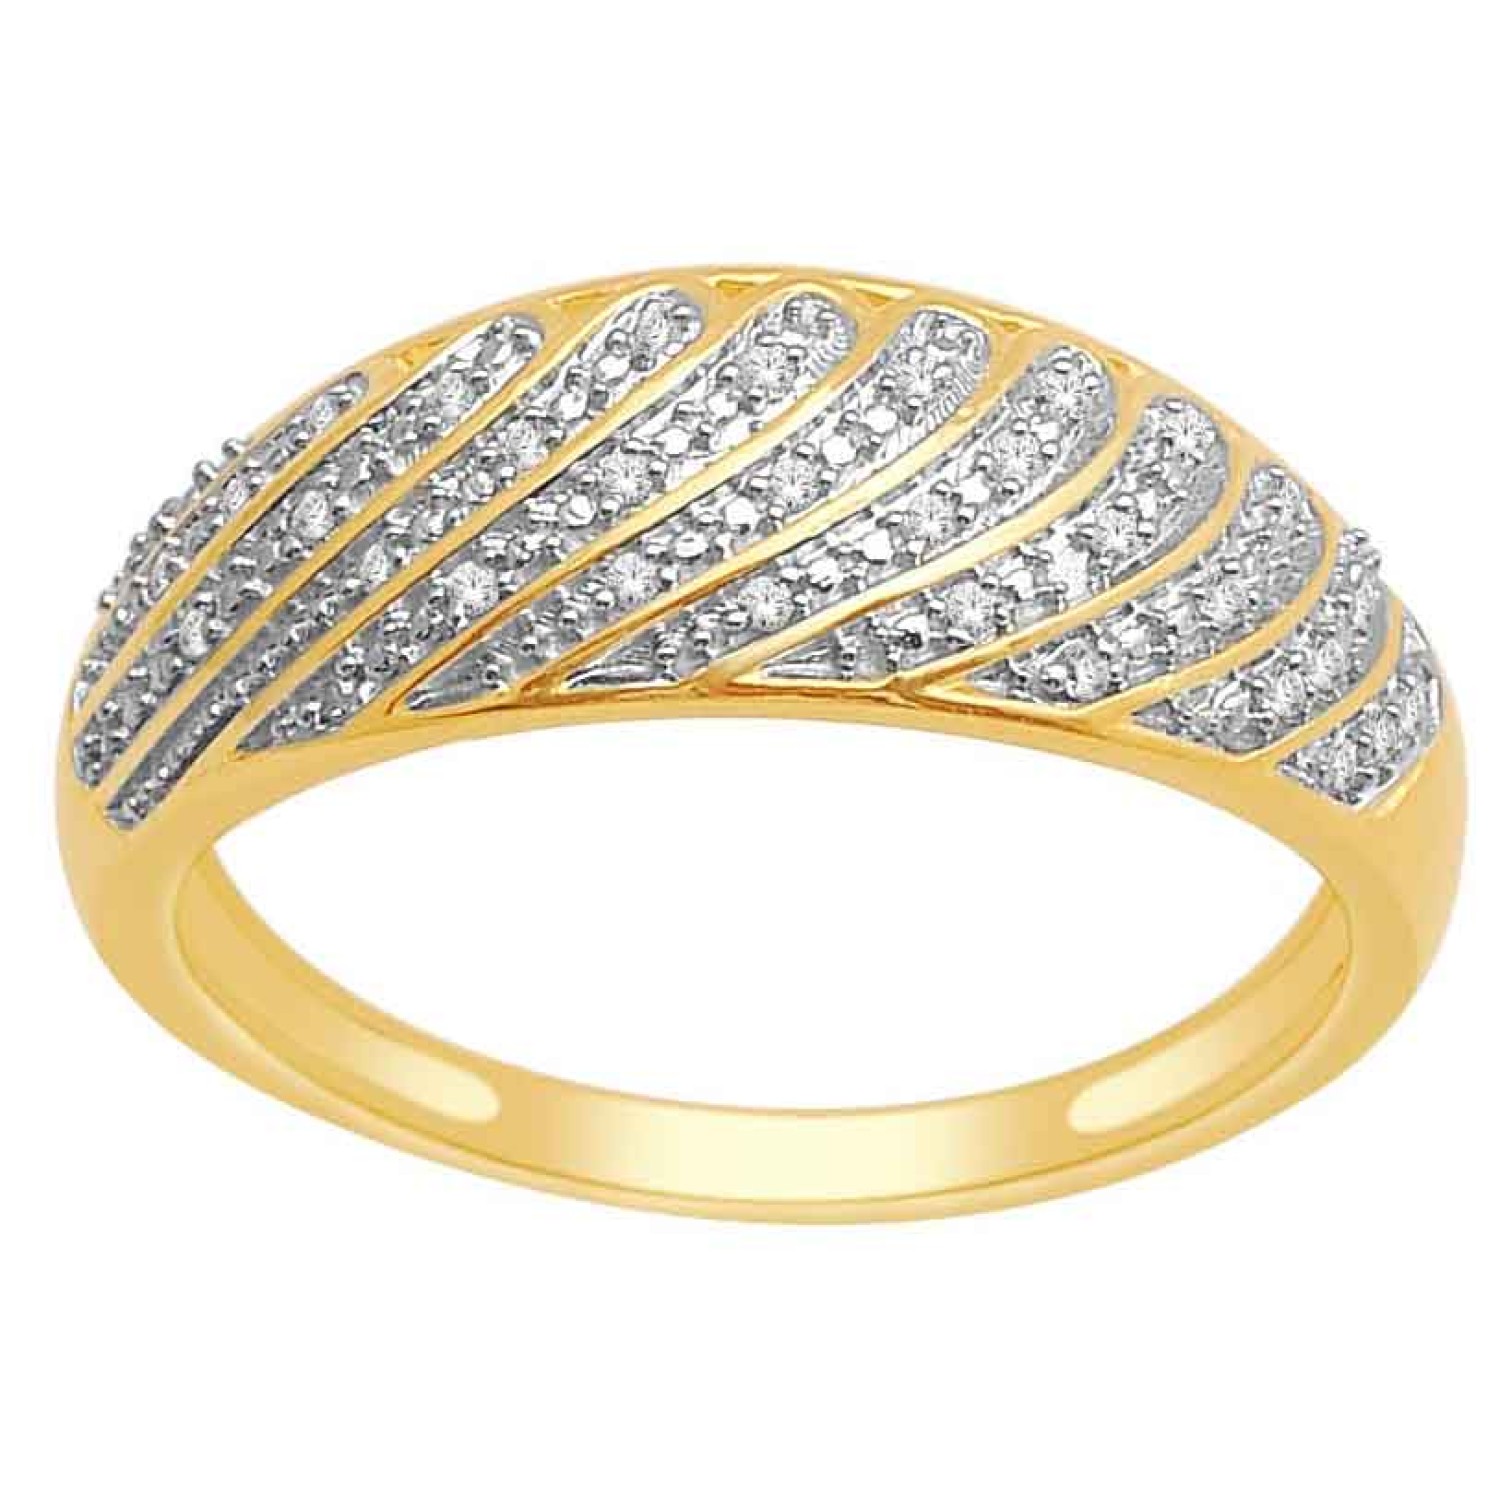 9ct Diamond Yellow Gold Ring 0.07ct TDW. A 9ct Diamond Ring  with a total of 0.07ct in Diamonds 5 Year Written Guarantee 3 Months No Payments and Interest for Q Card holders LAYBUY - Pay it easy, in 6 weekly payments and have it now. Only pay the @christi